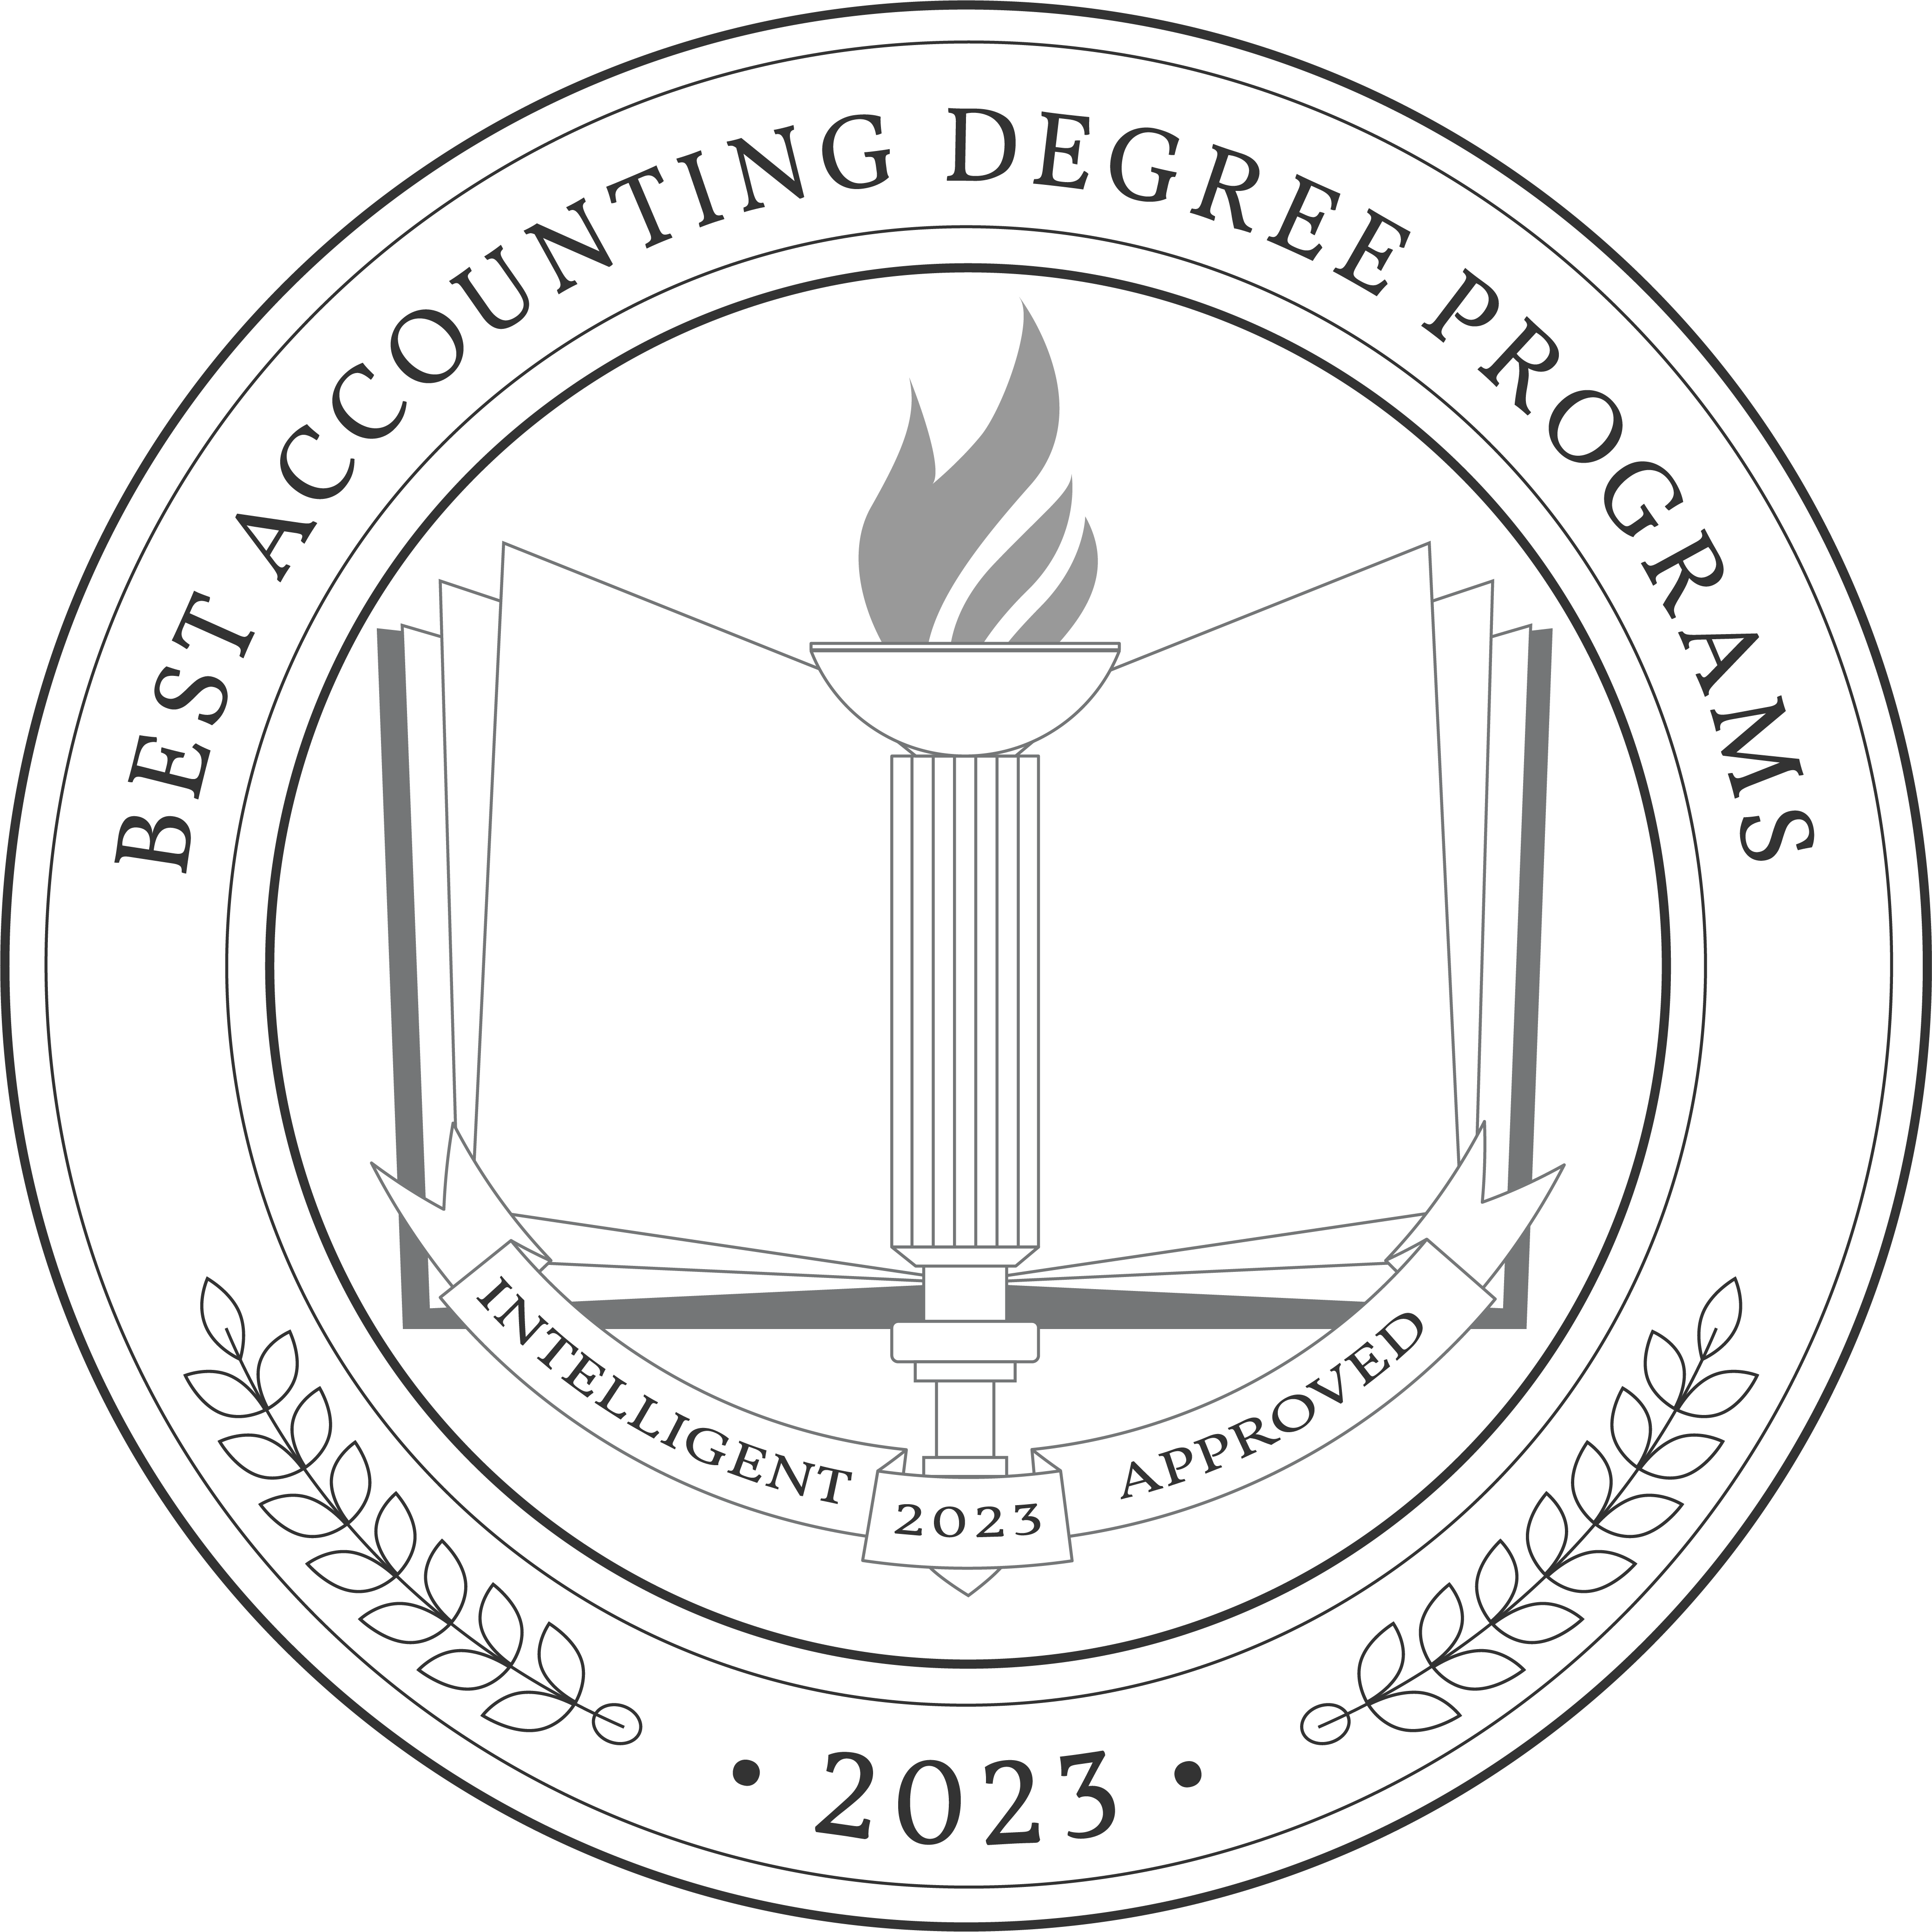 Best Accounting Degree Programs 2023